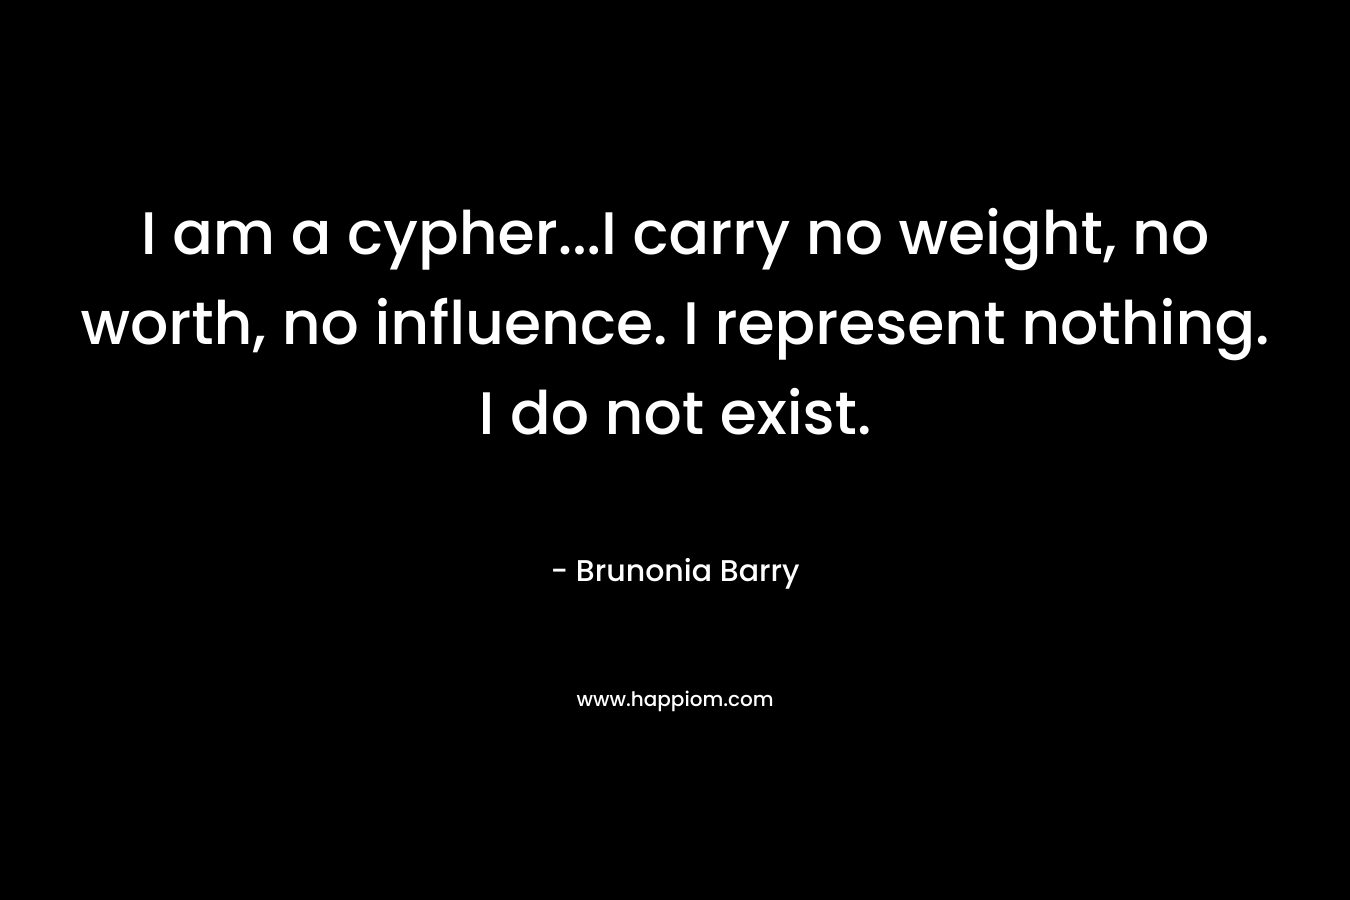 I am a cypher...I carry no weight, no worth, no influence. I represent nothing. I do not exist.